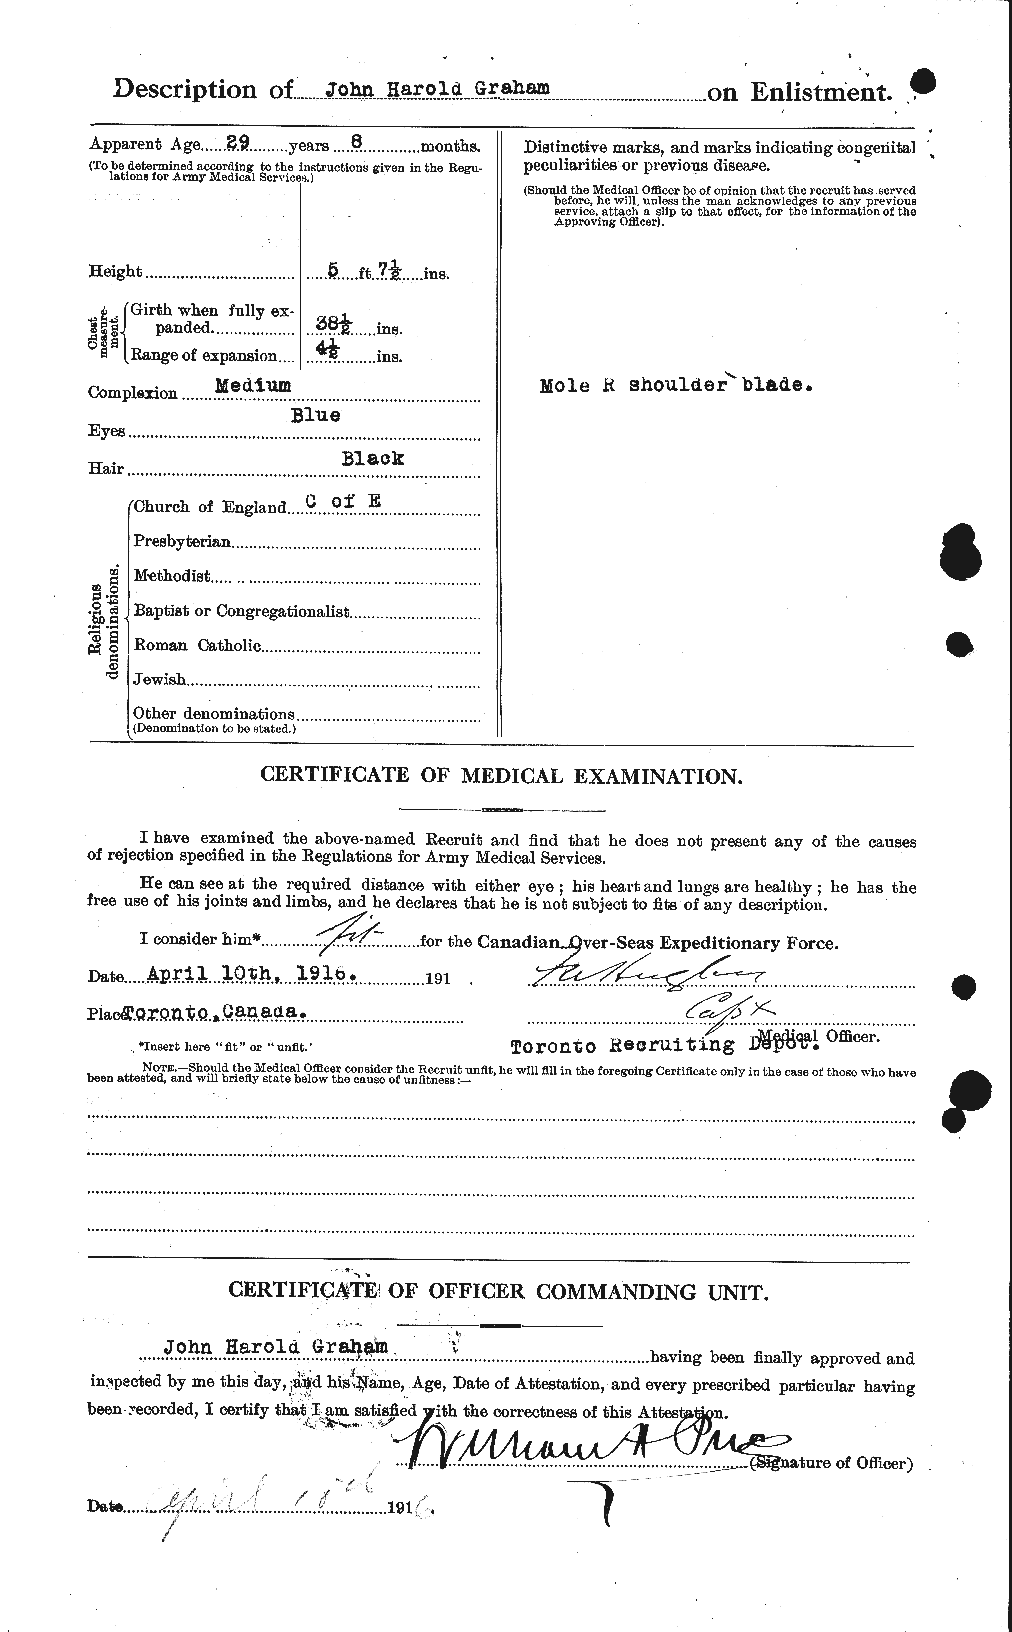 Personnel Records of the First World War - CEF 359178b